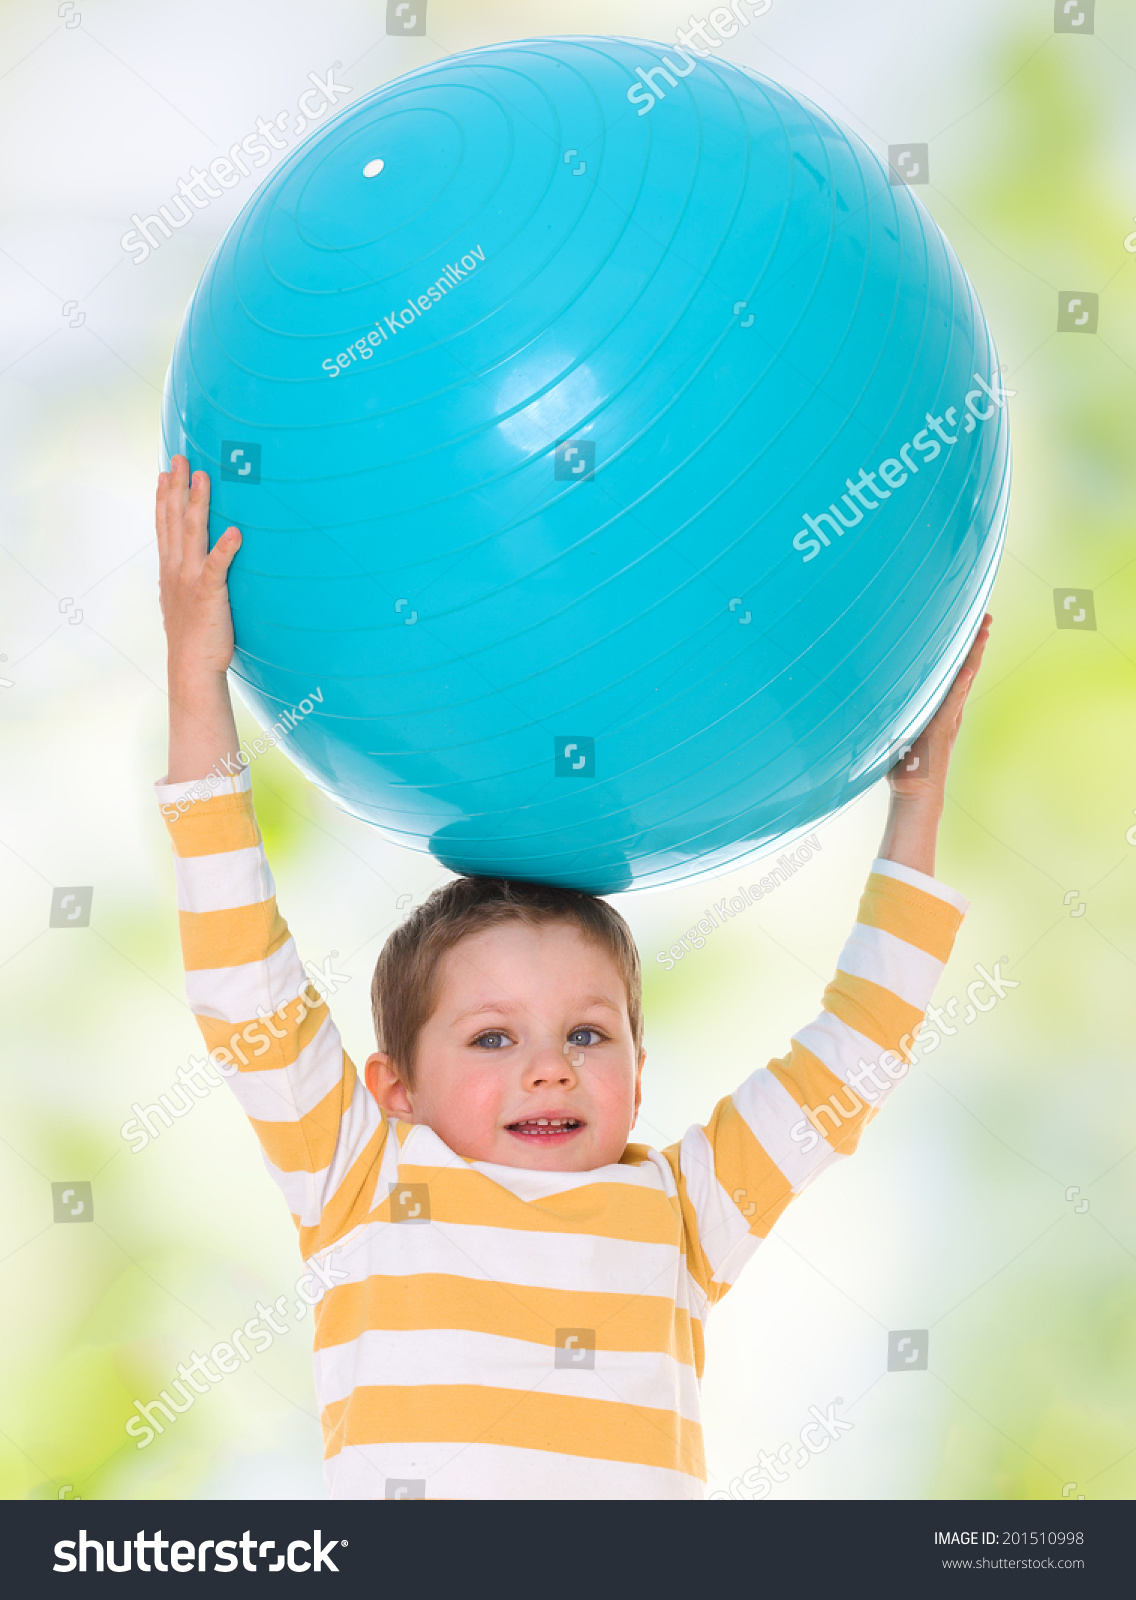 big ball for toddler